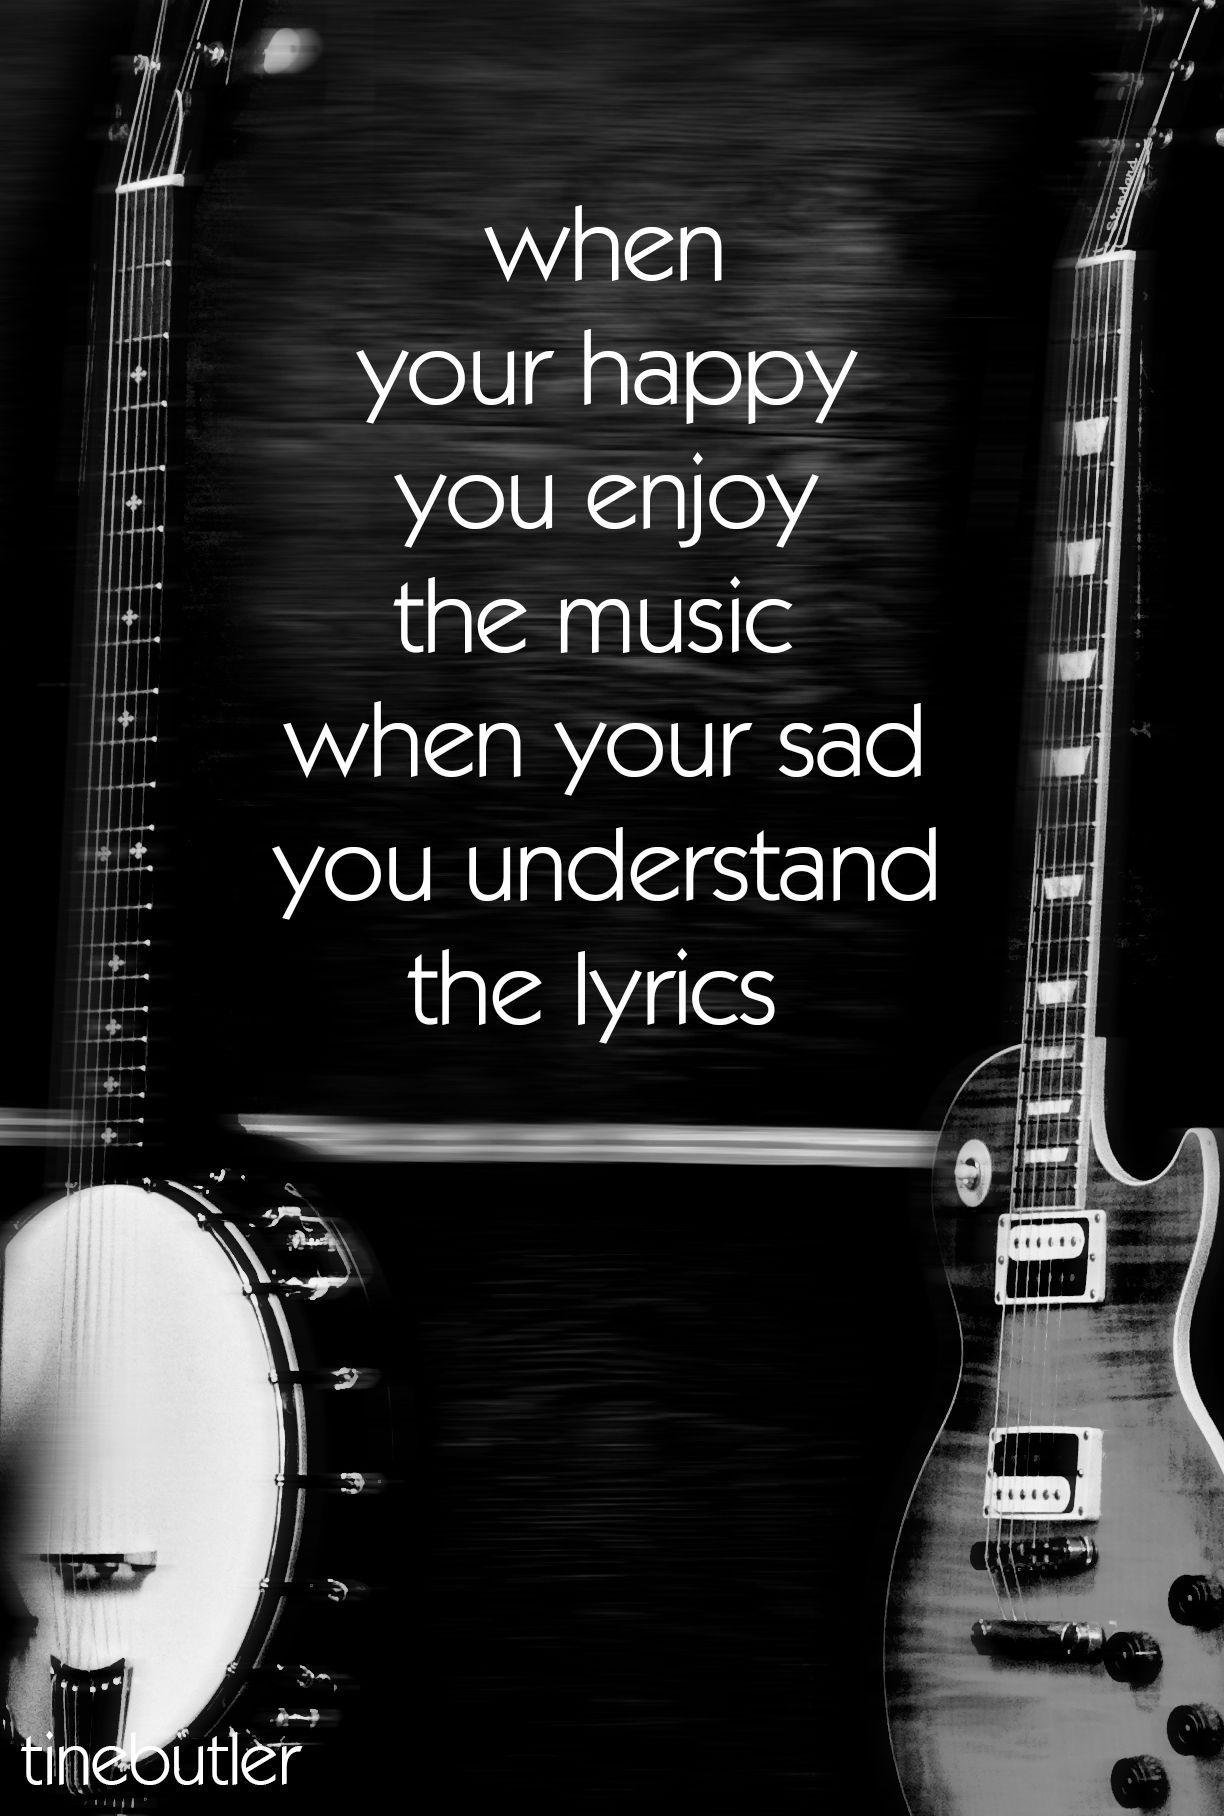 when your happy you enjoy the music when your sad you understand